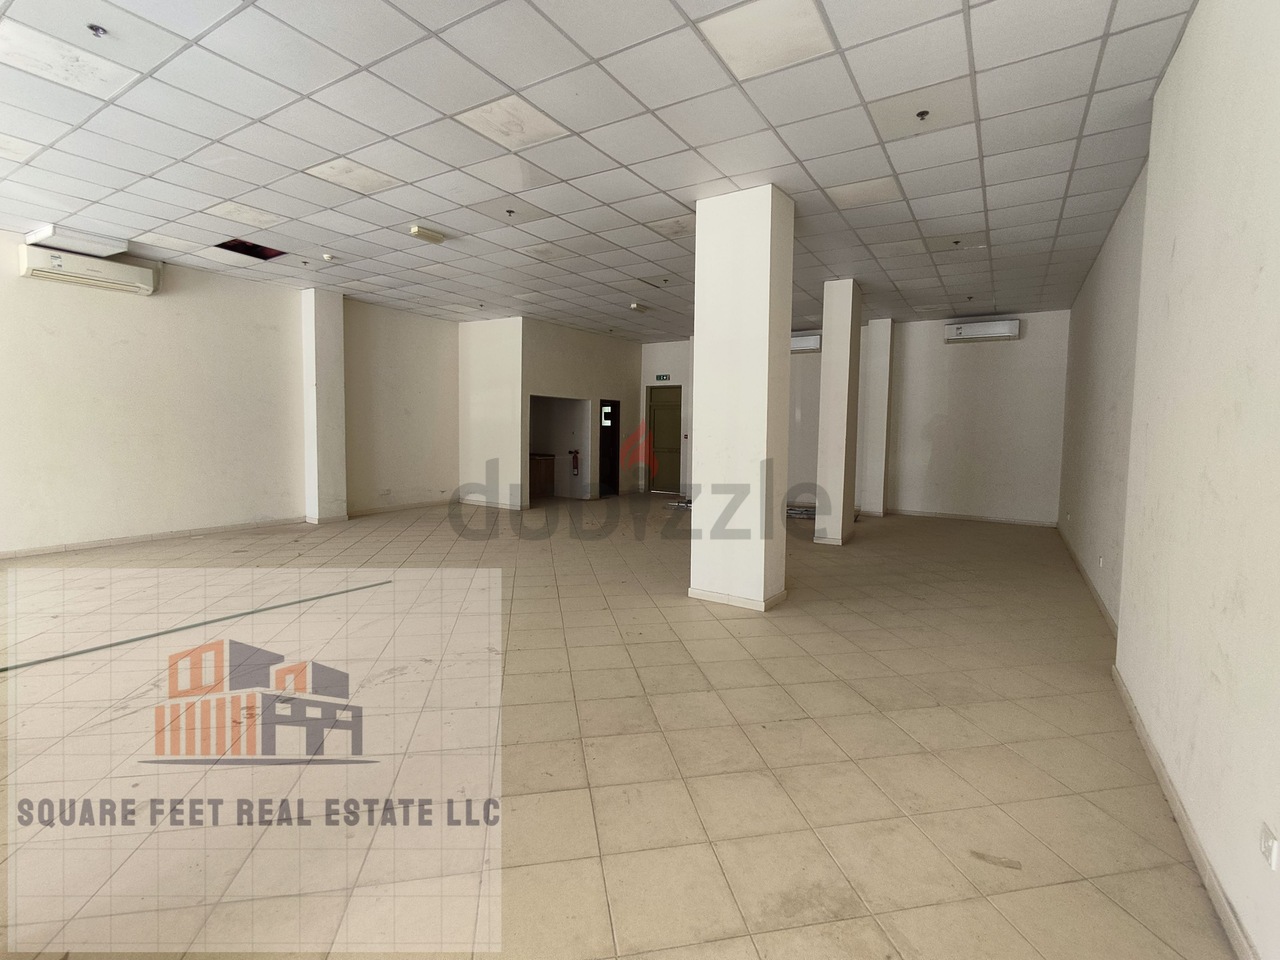 Main Road Facing Showroom For Urgent Lease !!